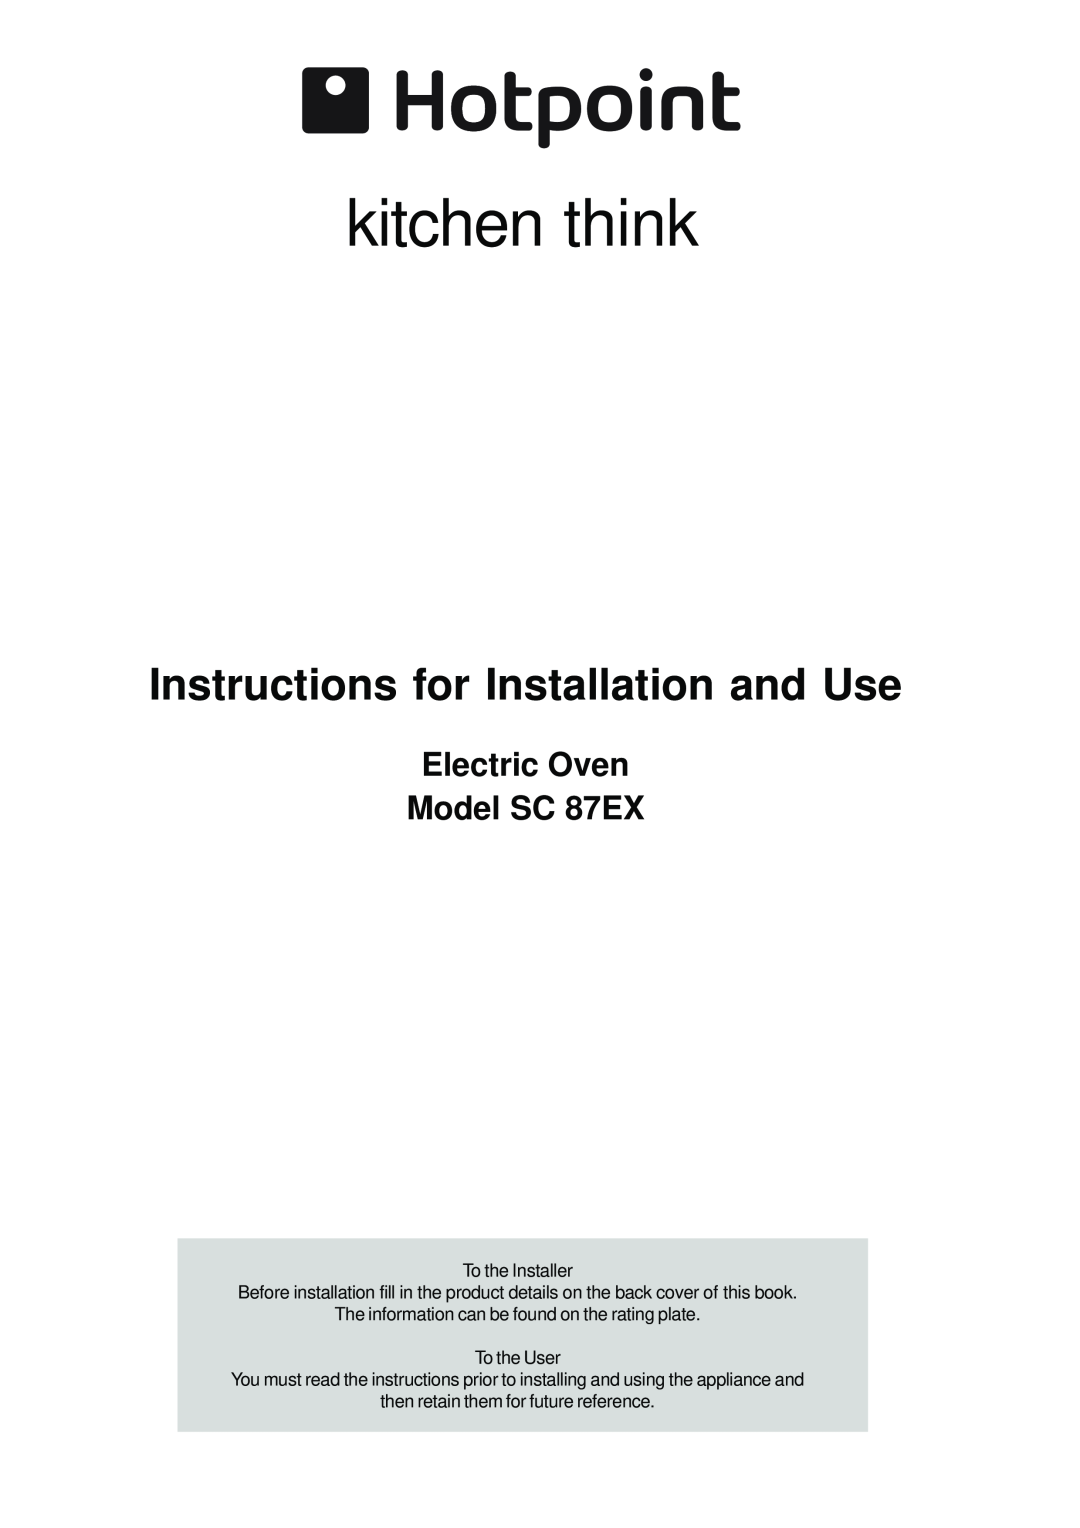 Hotpoint manual Electric Oven Model SC 87EX, kitchen think, Instructions for Installation and Use 